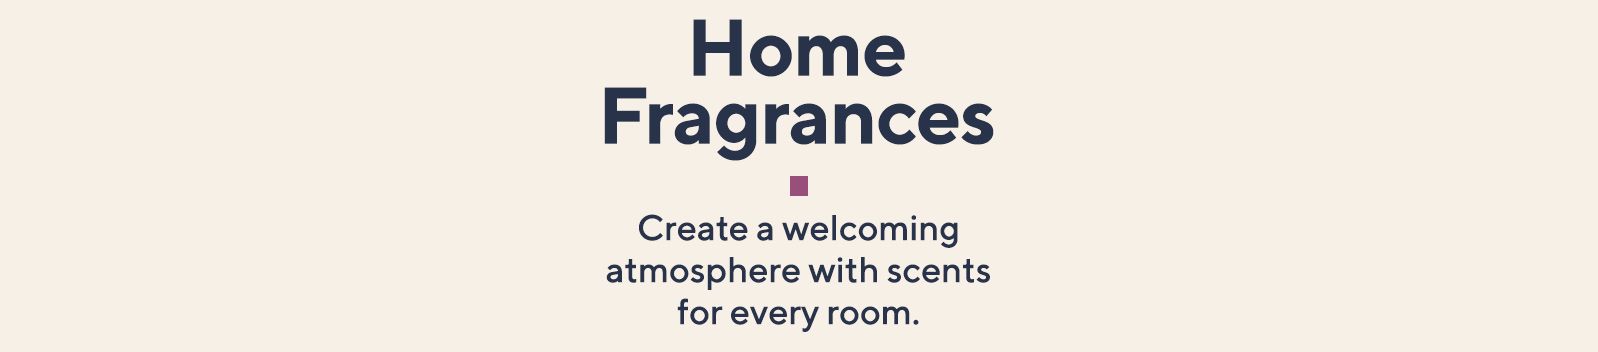 Home Fragrances - Create a welcoming atmosphere with scents for every room.